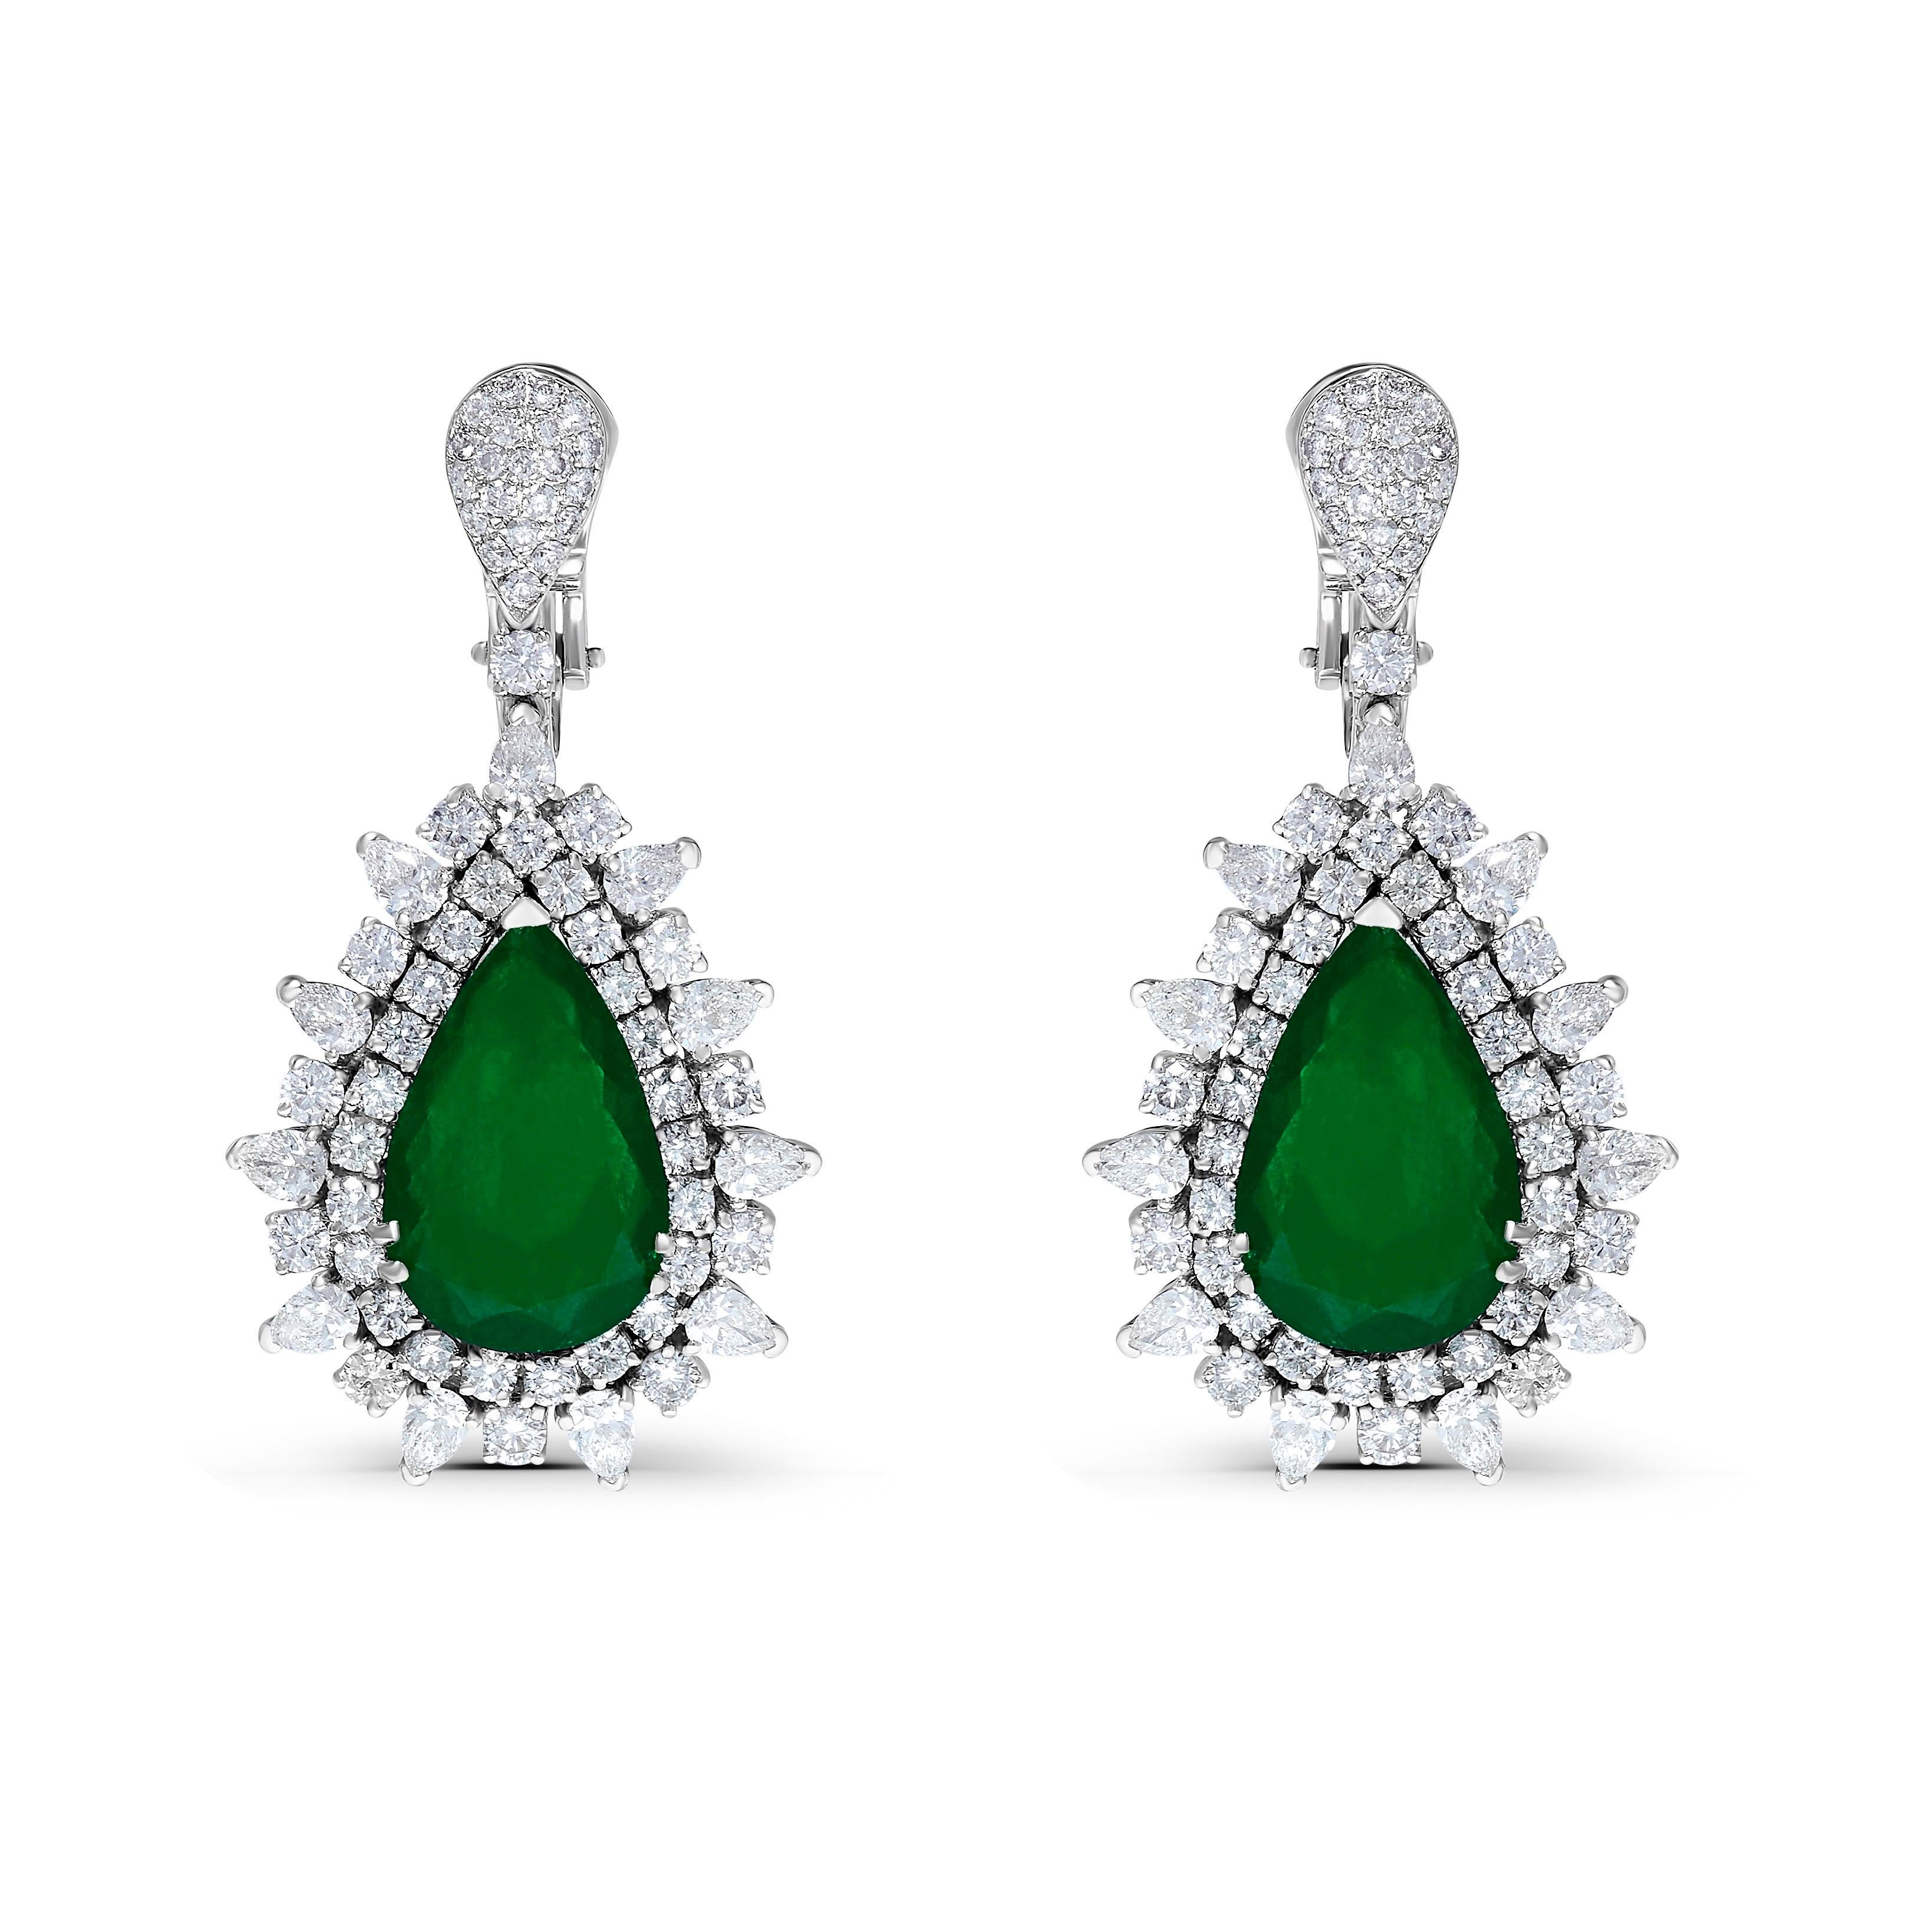 From the Emilio Jewelry Museum Vault in New York,
Showcasing exquisite  muzo Colombian vivid green emeralds of exceptional quality set in the center. 
Emilio Jewelry is a dealer, wholesaler now offering our exclusive pieces direct to the consumer.